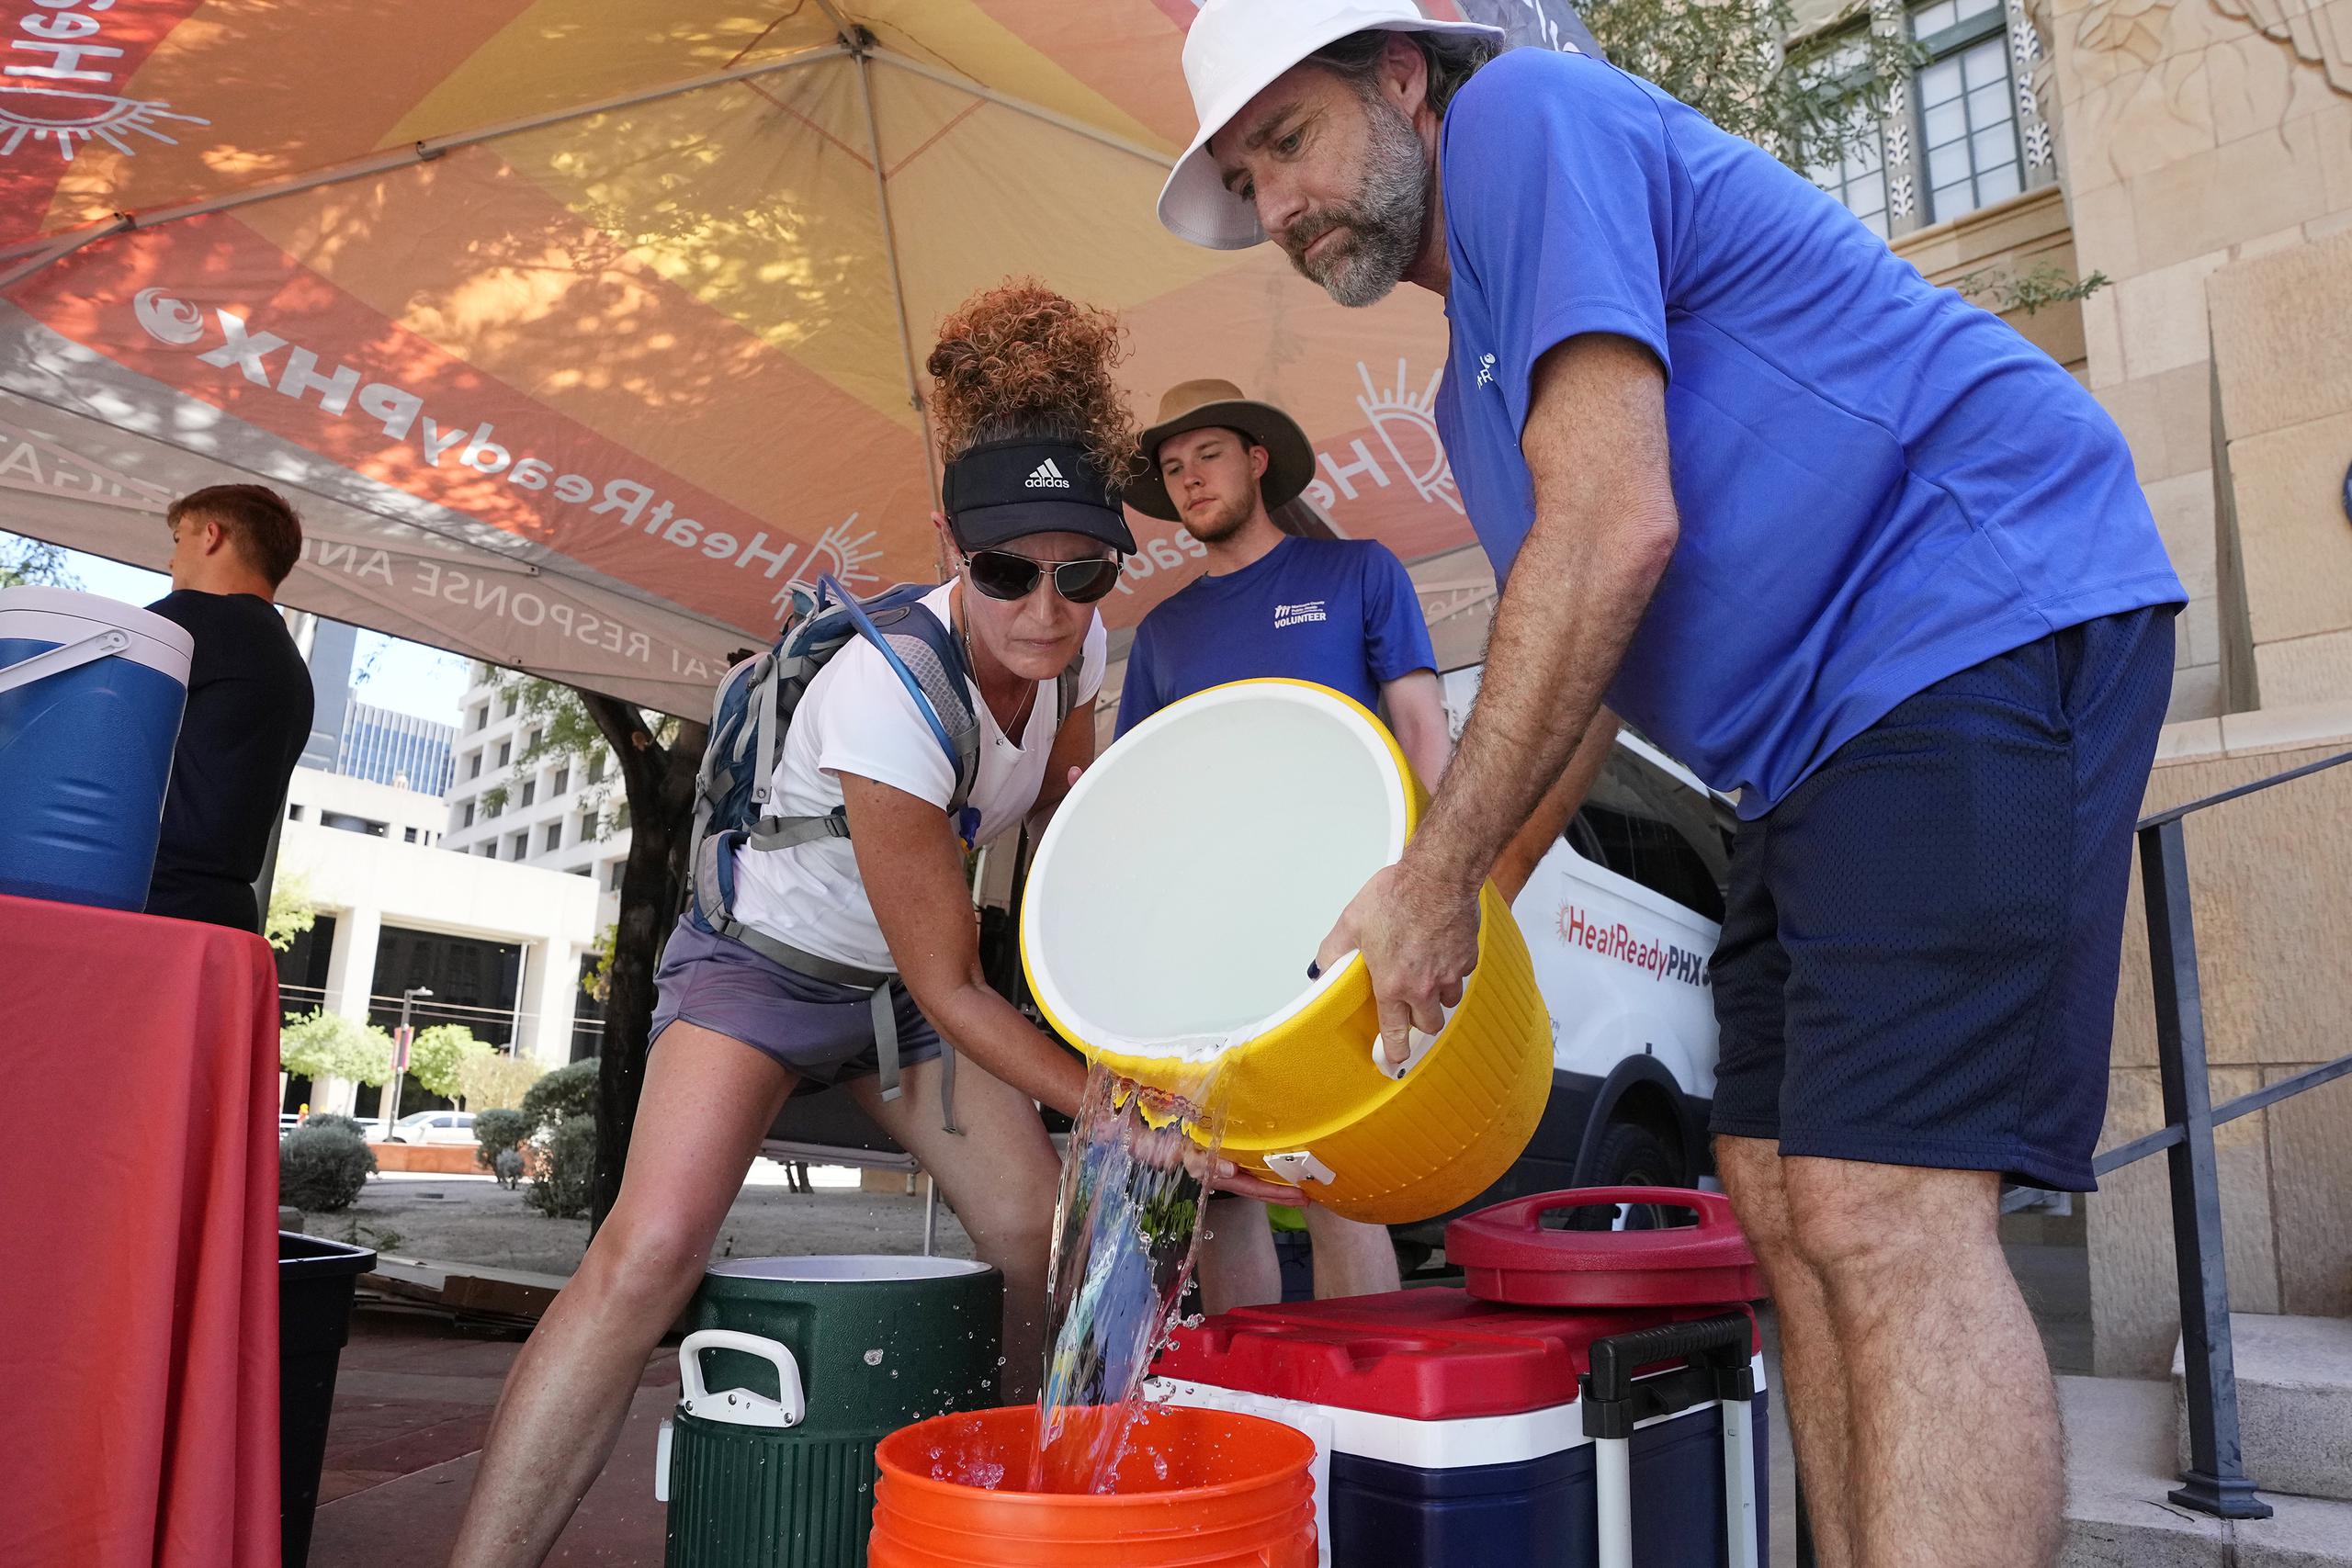 The City of Phoenix Heat Response Program team volunteers Natalie Boyd, left, and David Coughenour, right, prepare heat relief kits for the public in need as temperatures are expected to hit 119-degrees Thursday, July 20, 2023, in Phoenix. (AP Photo/Ross D. Franklin)